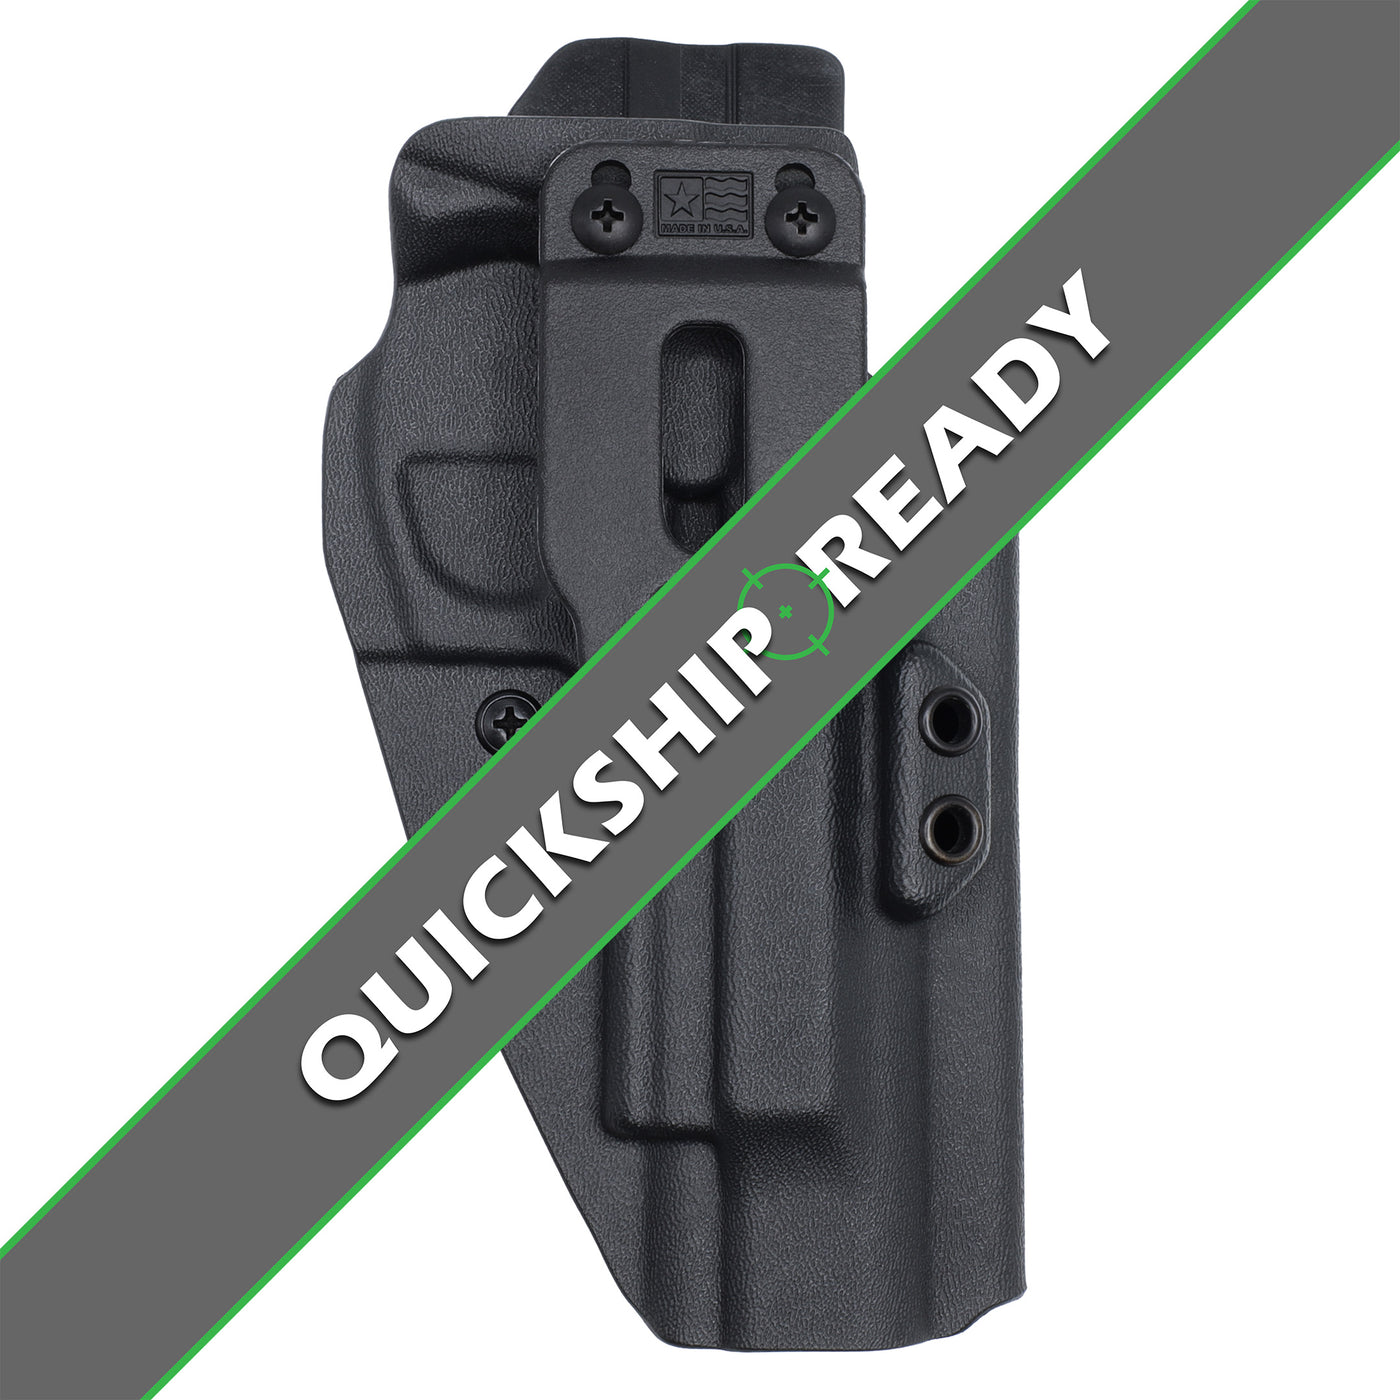 Quickship Banner with Holster